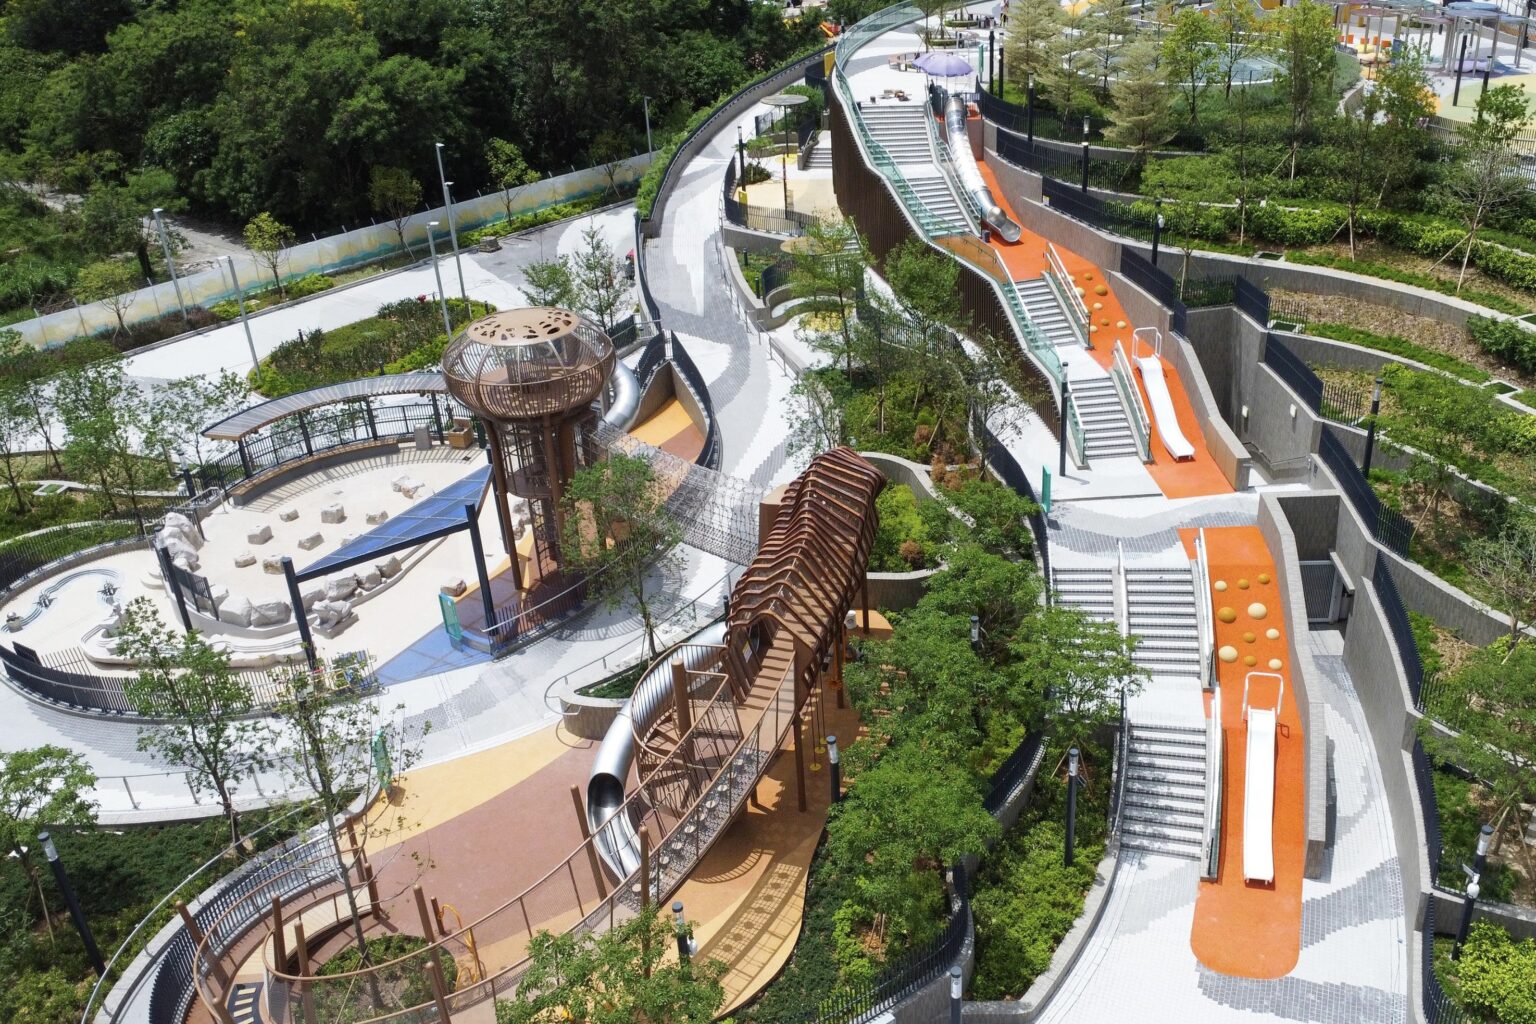 An overhead view of the landscaped deck at the Cha Kwo Ling Promenade. There are slides, a rope tunnel bridge, and a series of steps connecting the various levels of the deck.